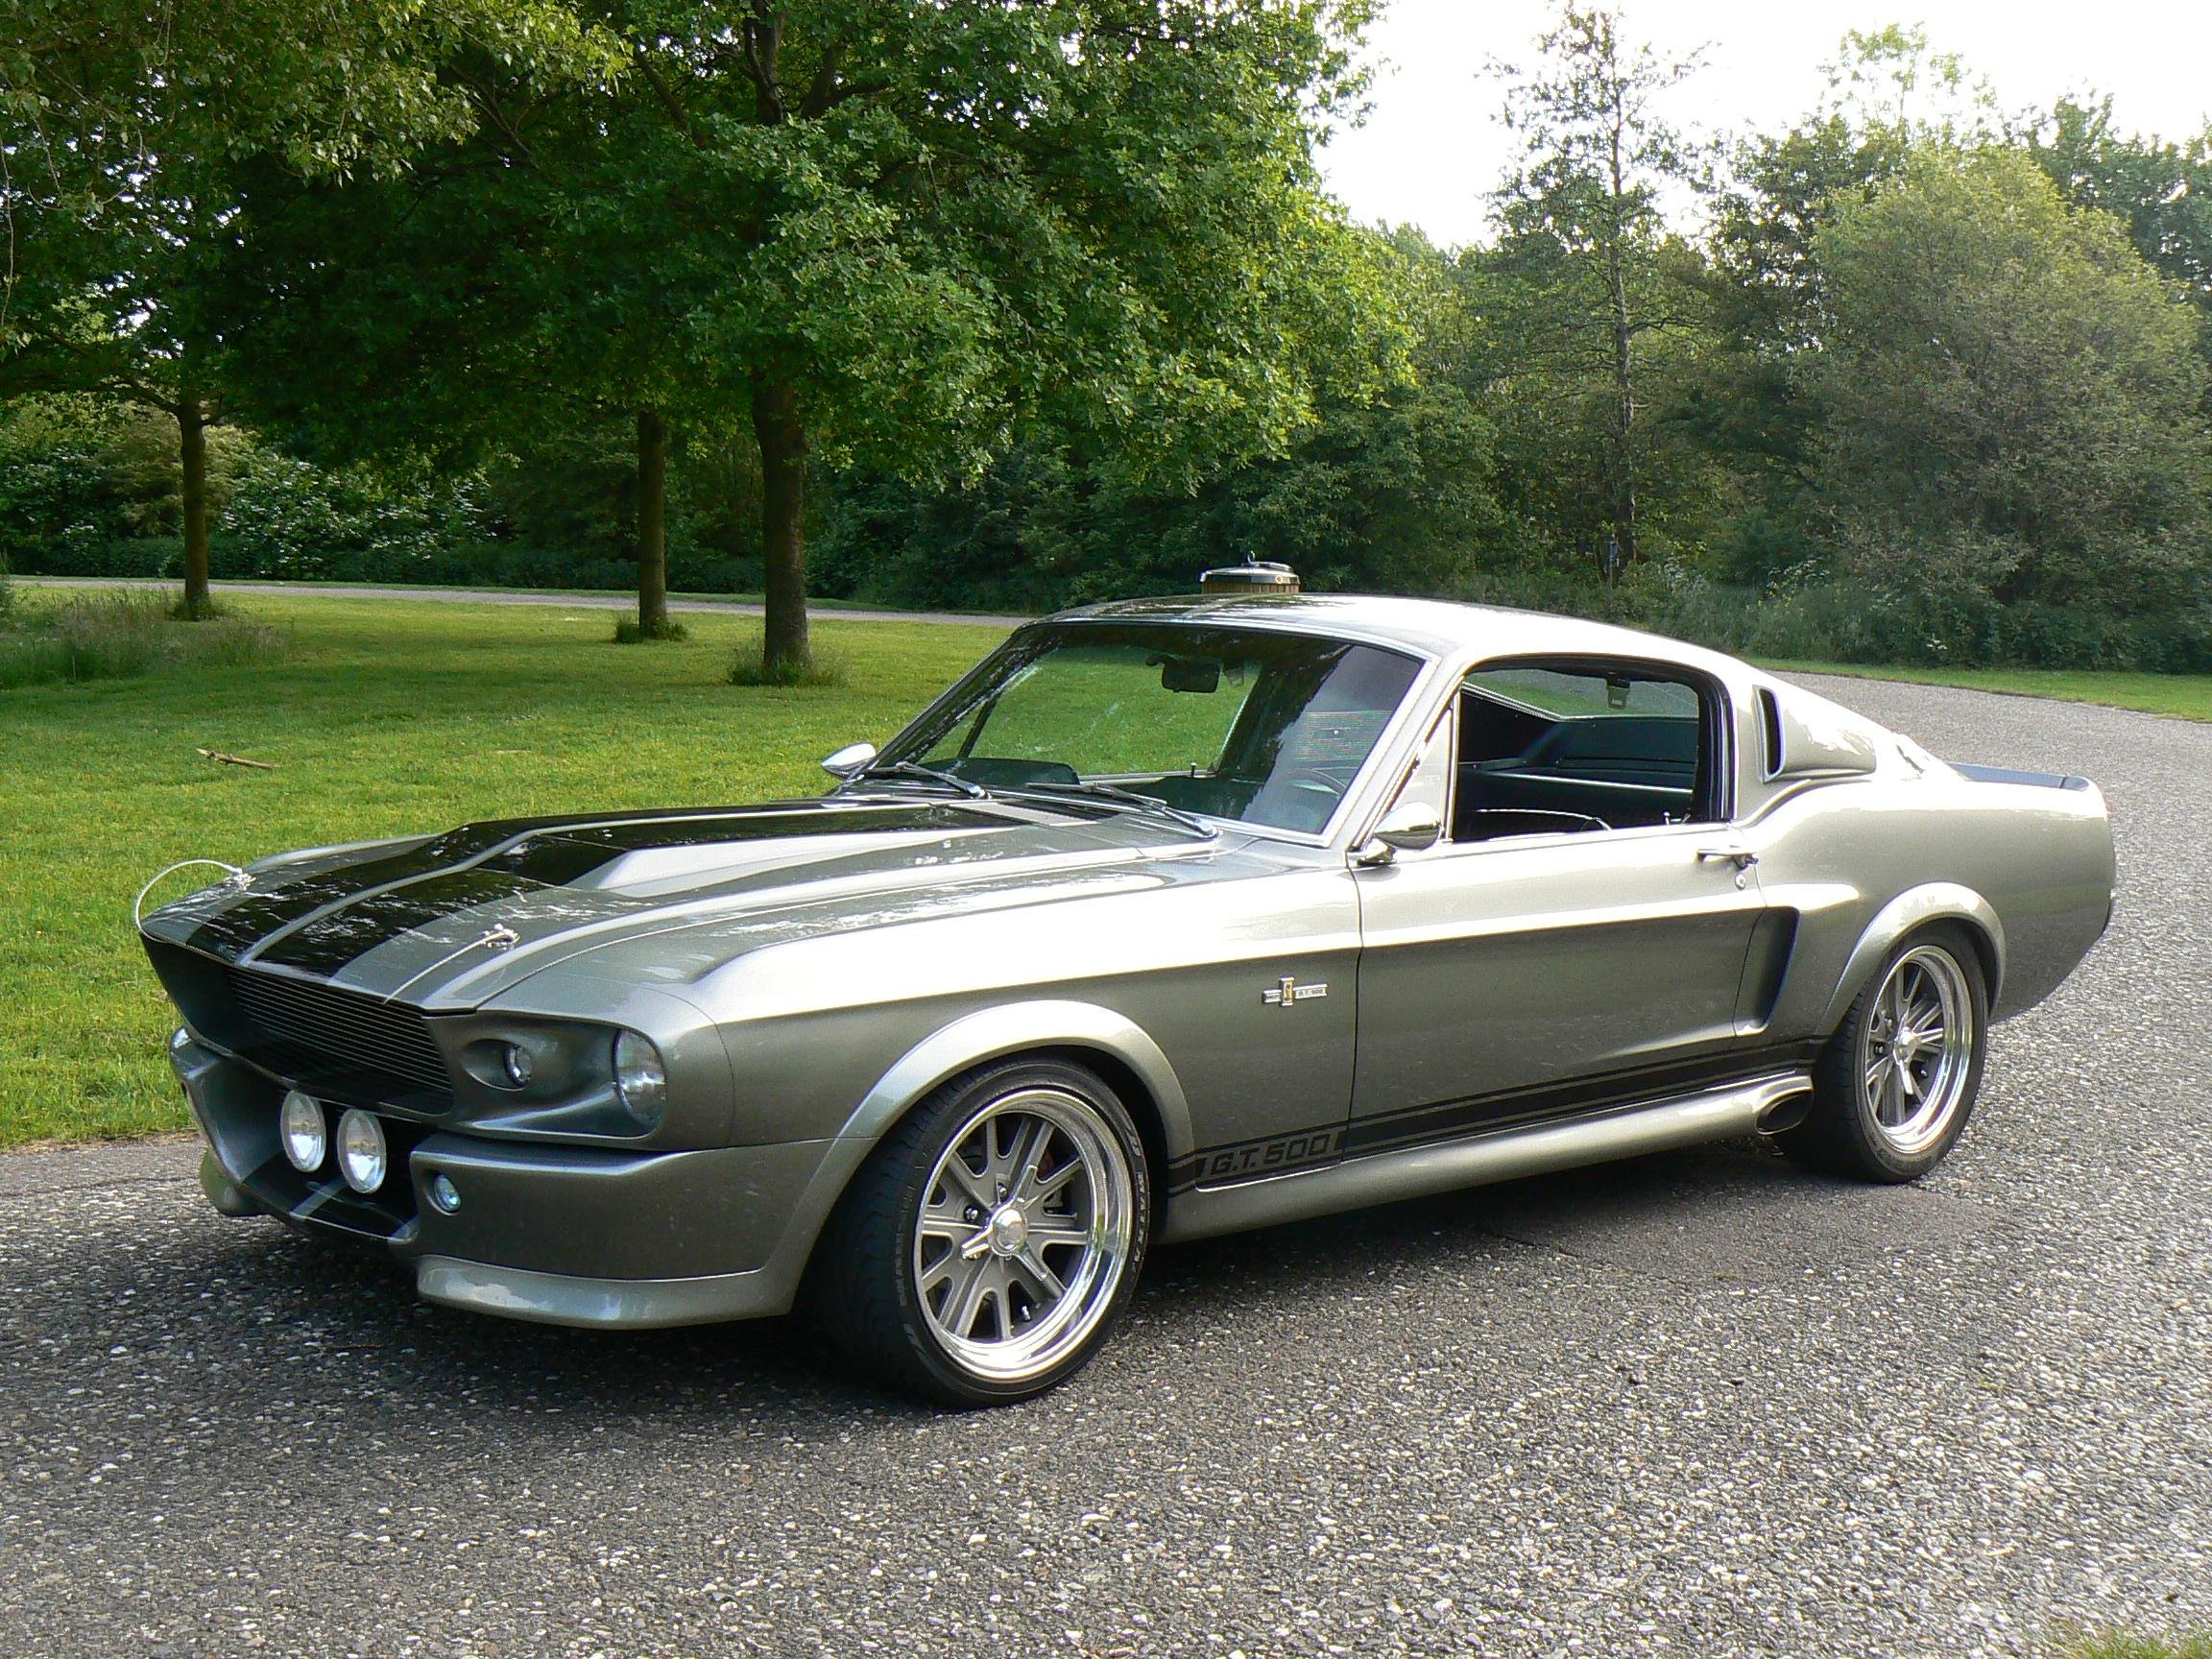 Classic Cobra Eleanor Ford Gt500 Hot Muscle Mustang Rod Rods